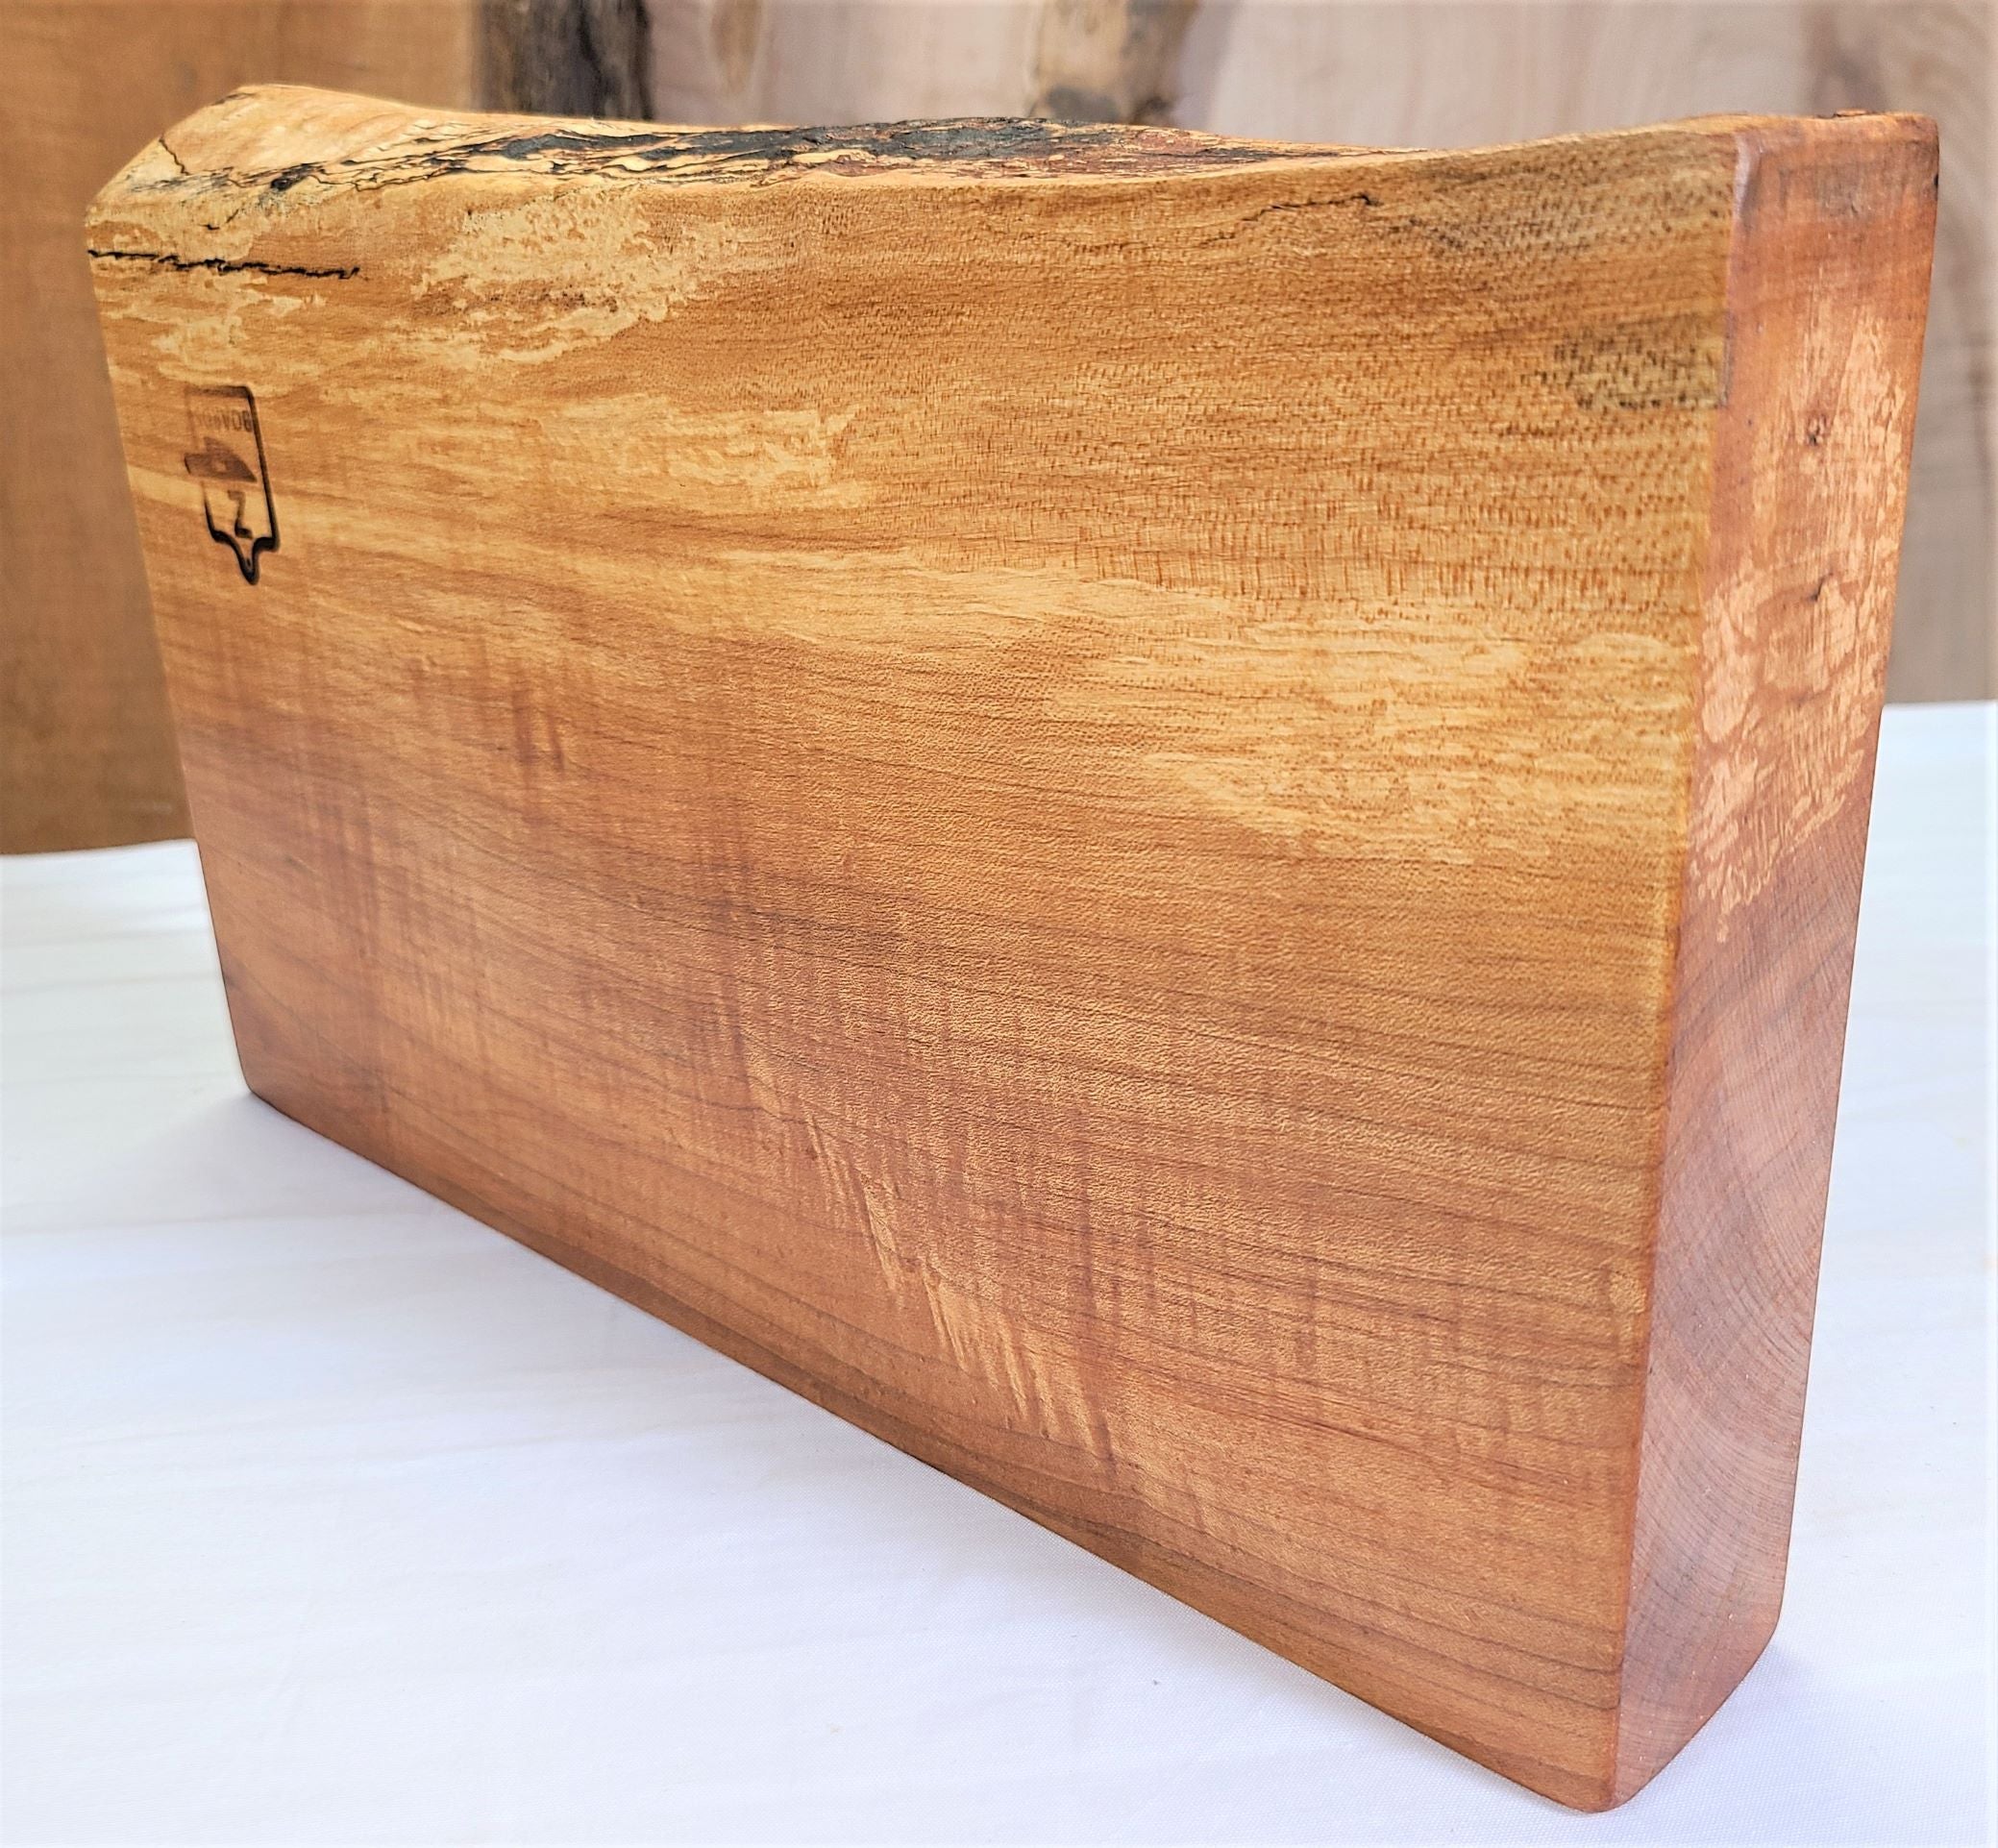 Live edge maple wood cutting board.  Thick solid wood built to handle everyday use and beautiful enough to use for serving and charcuterie.  Made in USA by ZimBoards